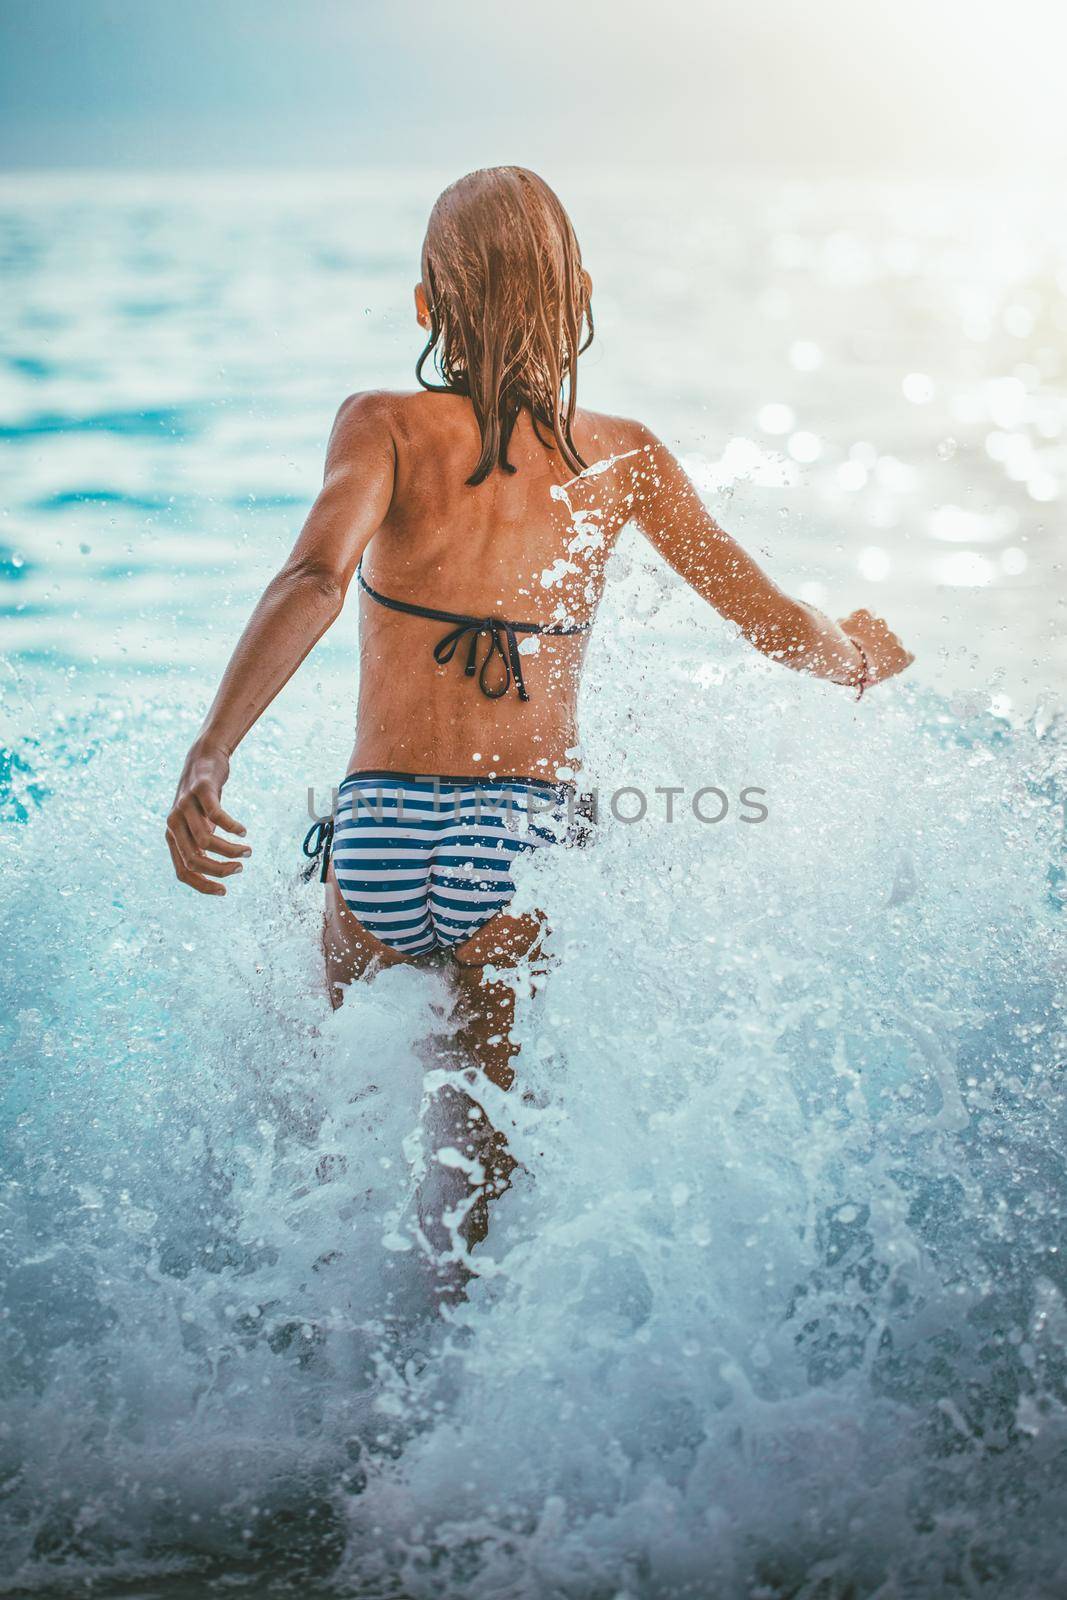 Happiness In The Waves by MilanMarkovic78